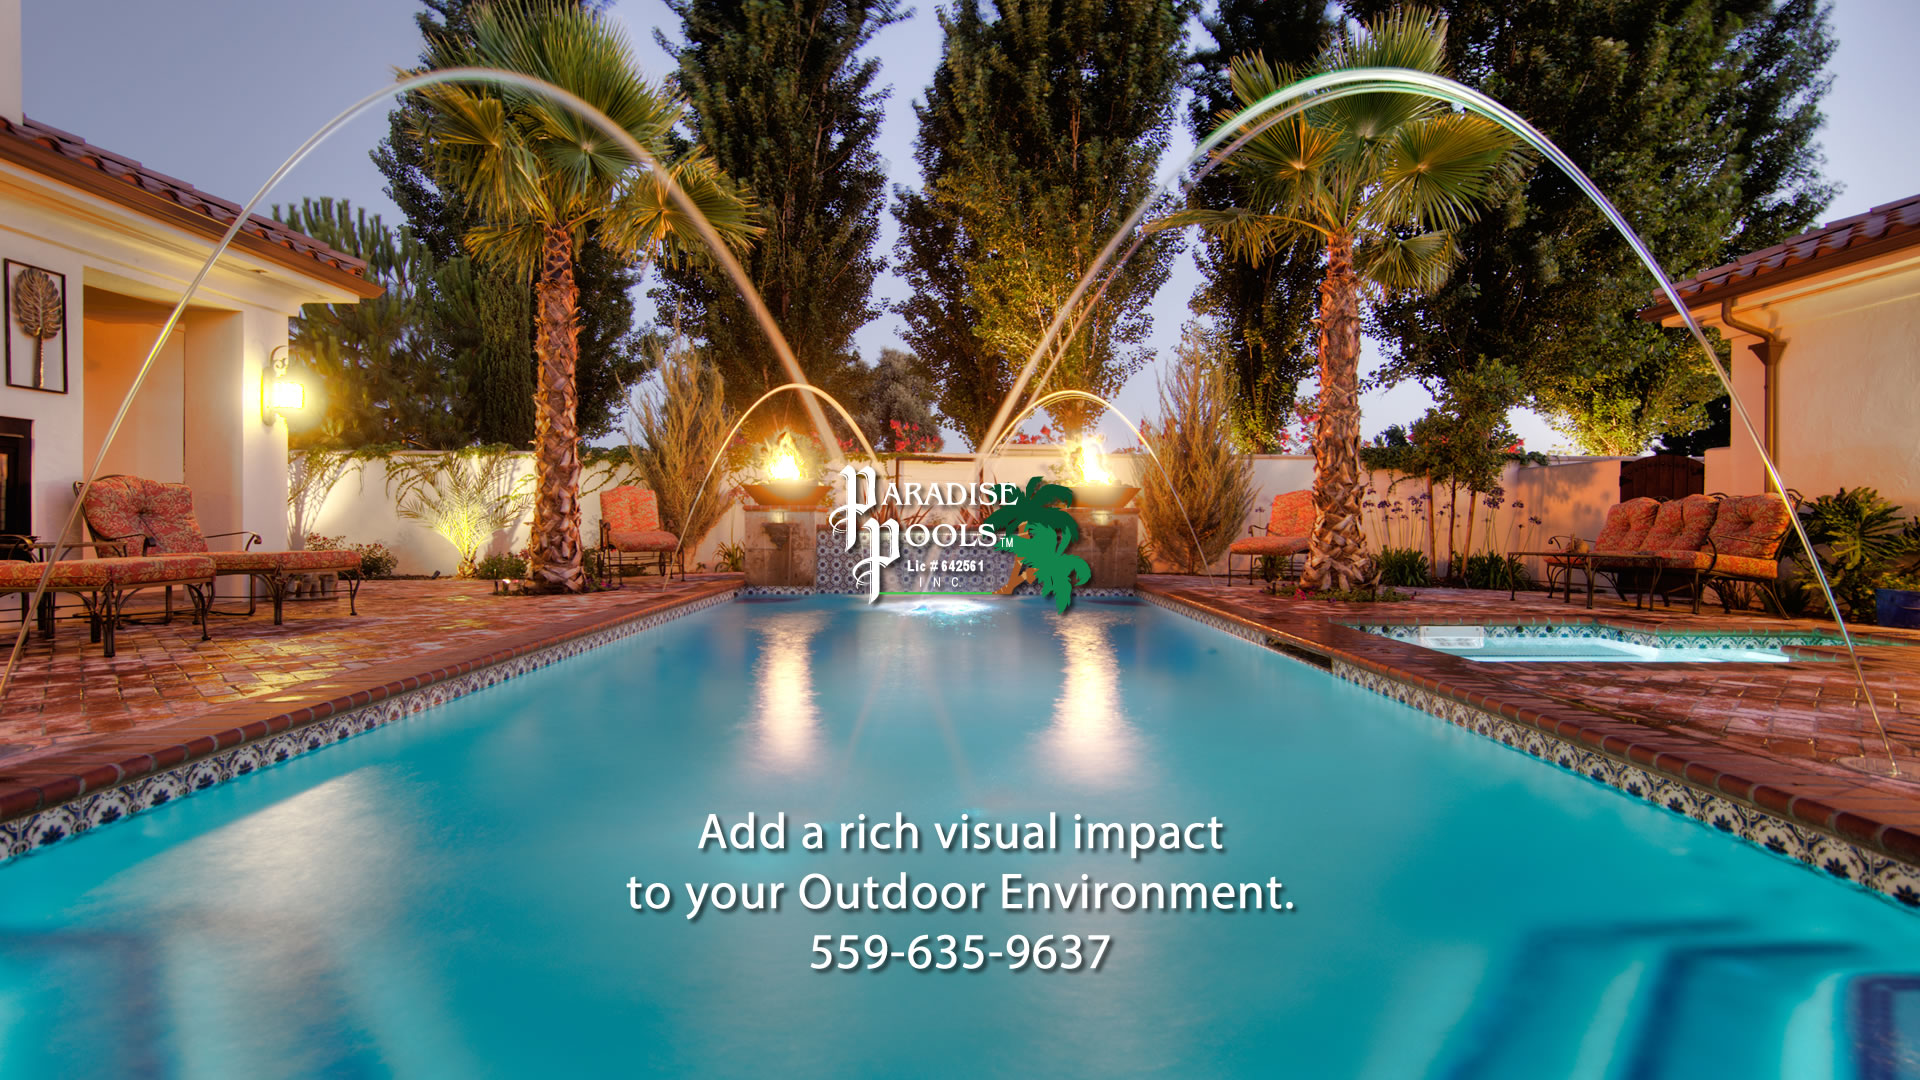 Add a rich visual impact to your Outdoor Environment. Find out more by calling Paradise PoolsTM (559) 635-9637